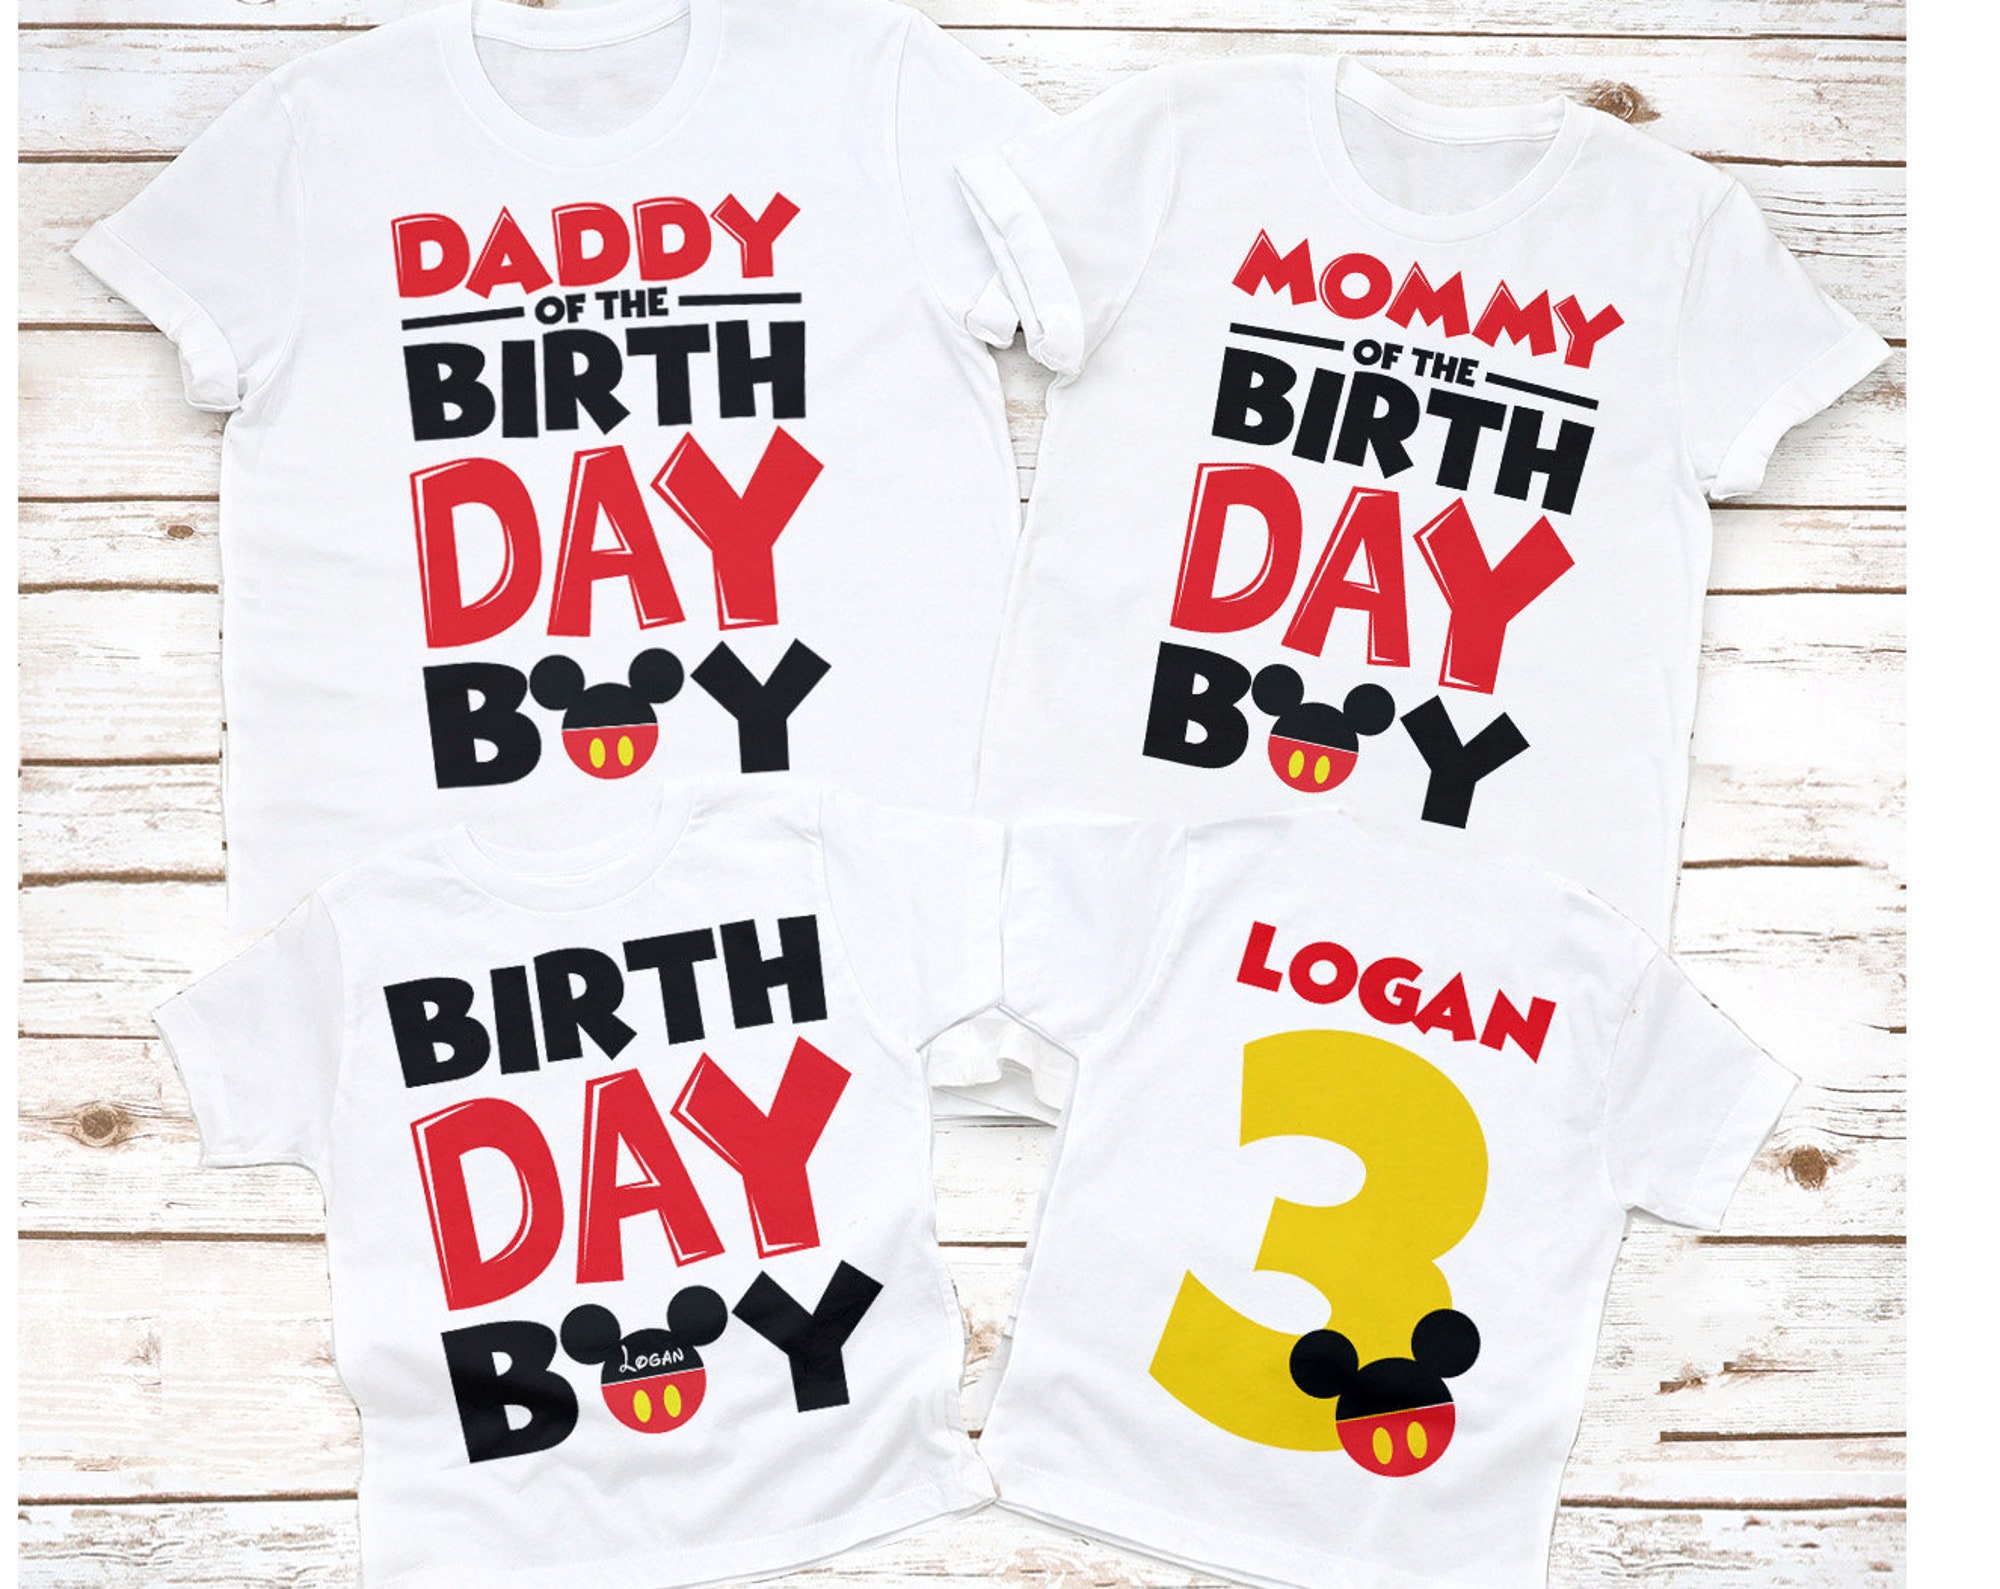 Discover Mickey Birthday Shirt, Mickey Mouse Birthday Shirt, Disney Birthday, Mickey Family Birthday shirt, Mickey Mouse shirt, Disney Party, Theme